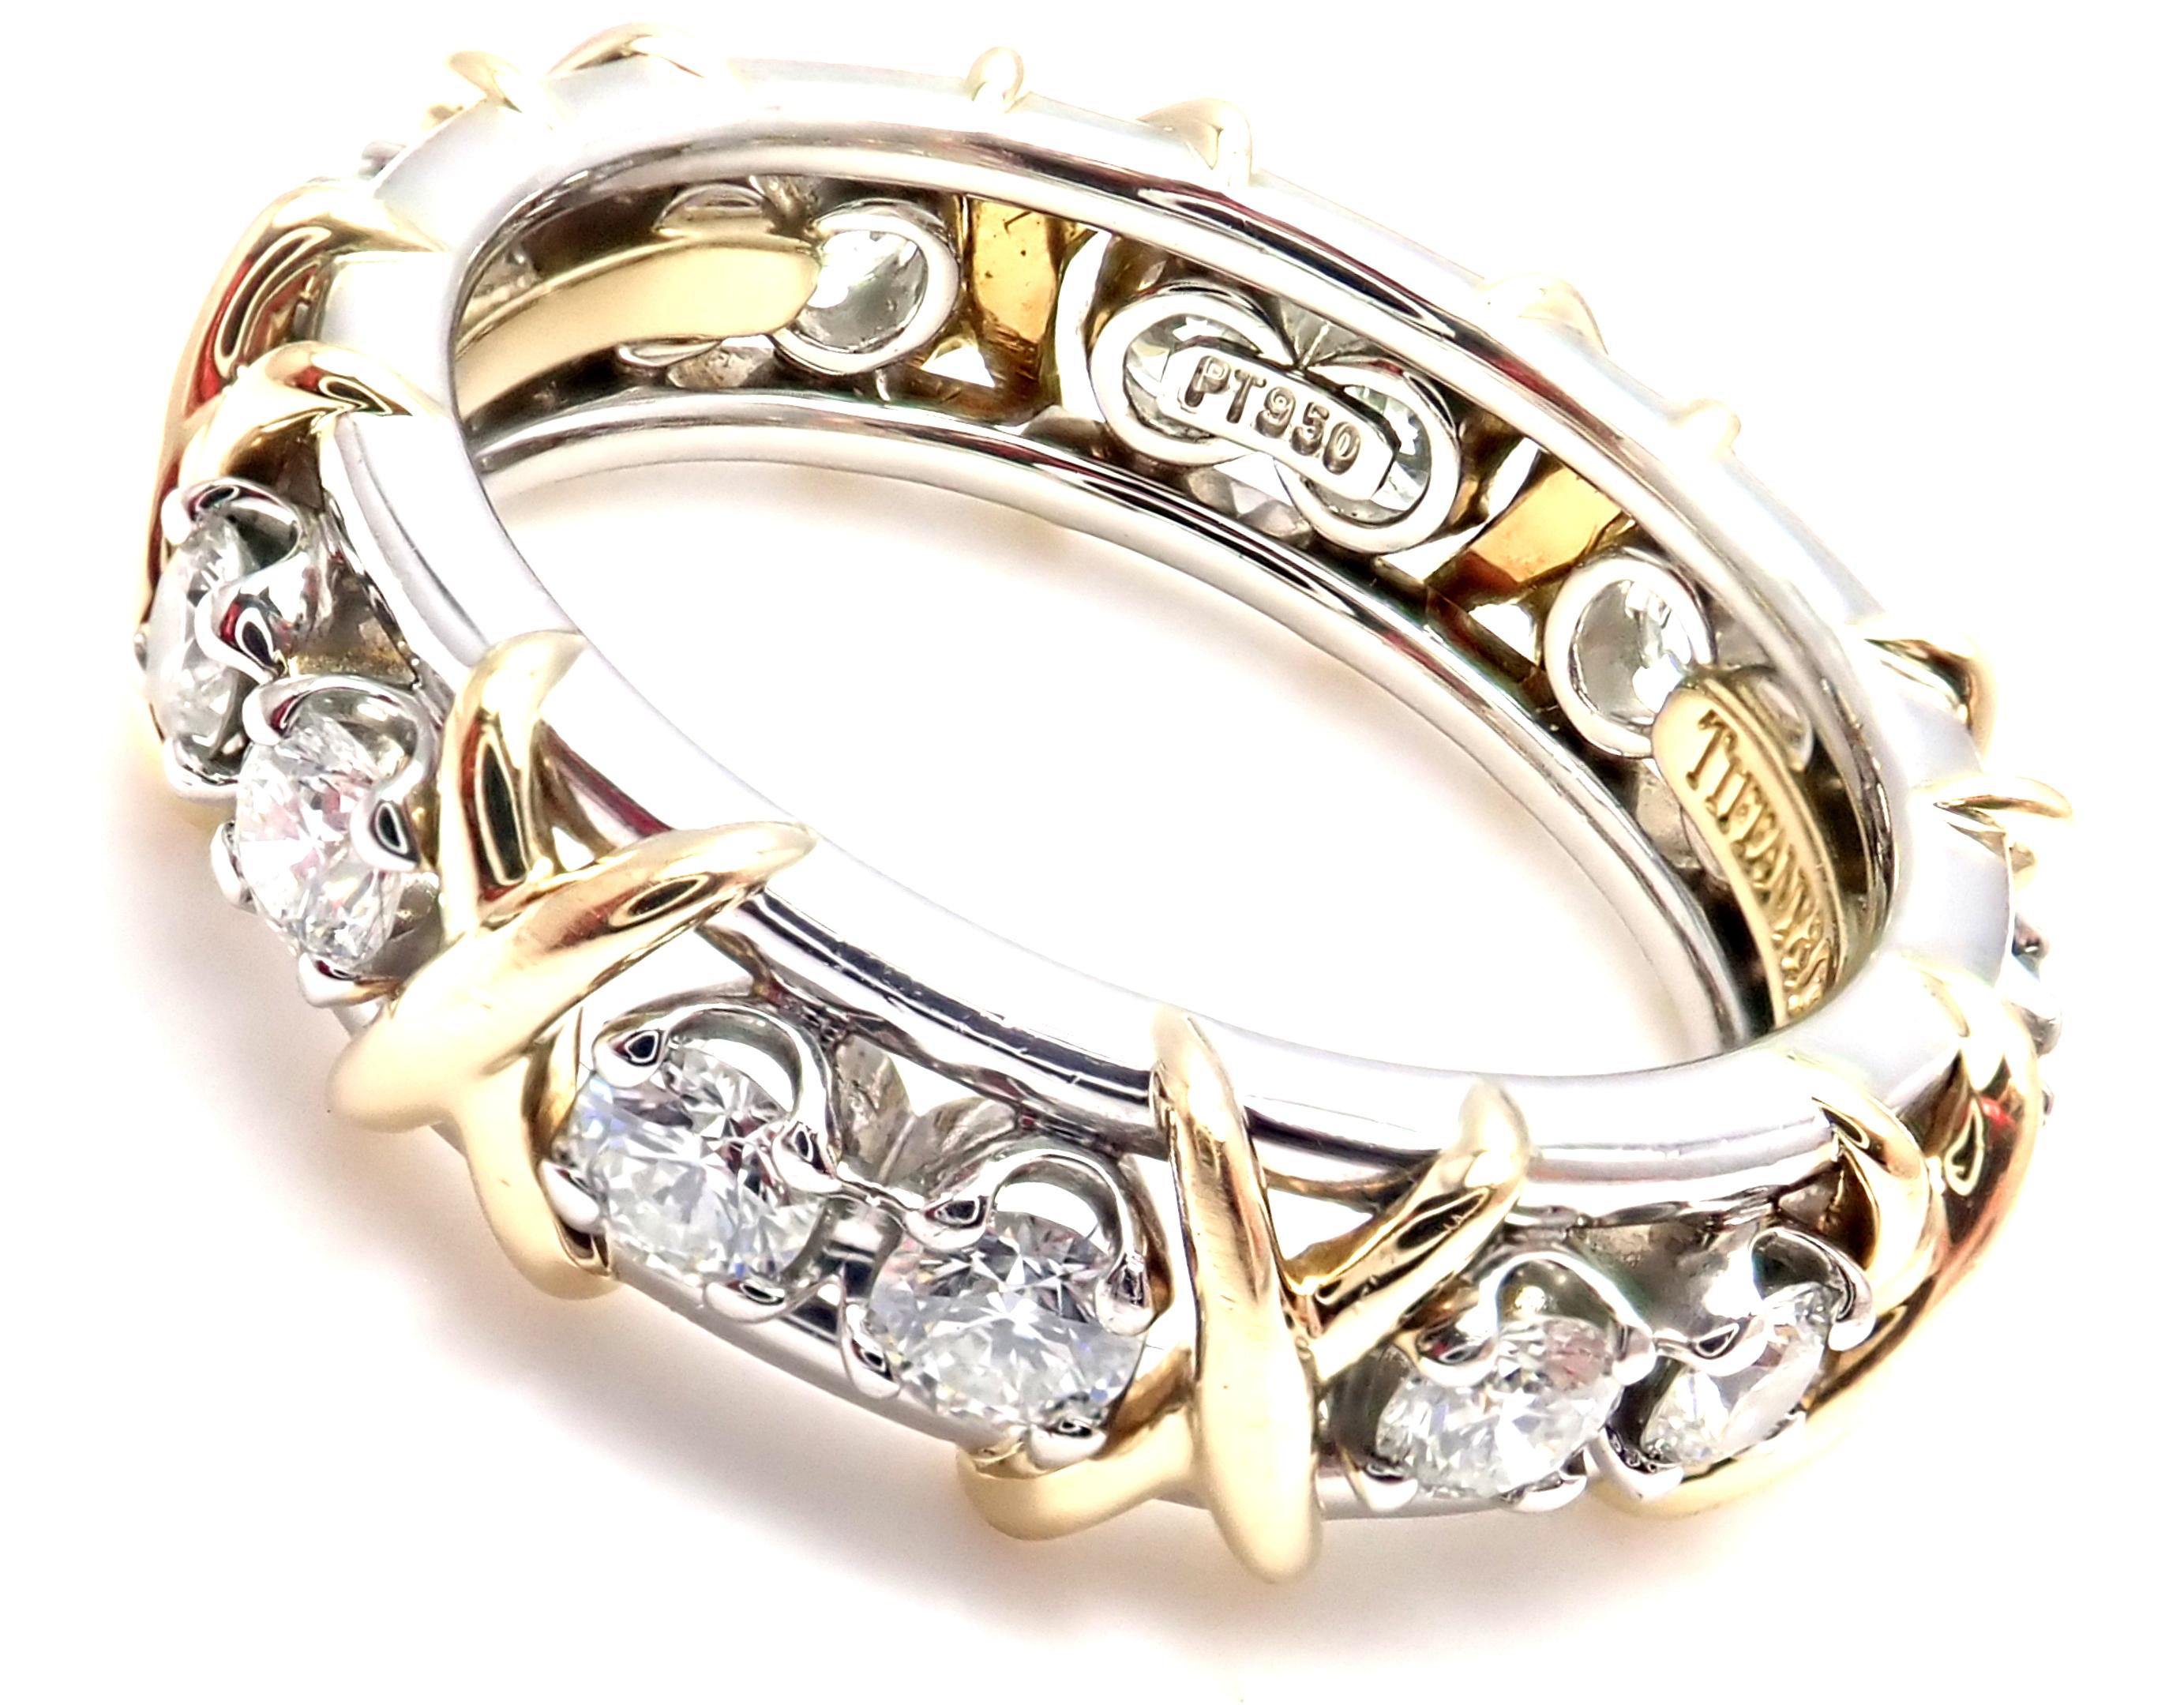 Tiffany & Co. Jean Schlumberger Diamond Yellow Gold and Platinum Band Ring 4